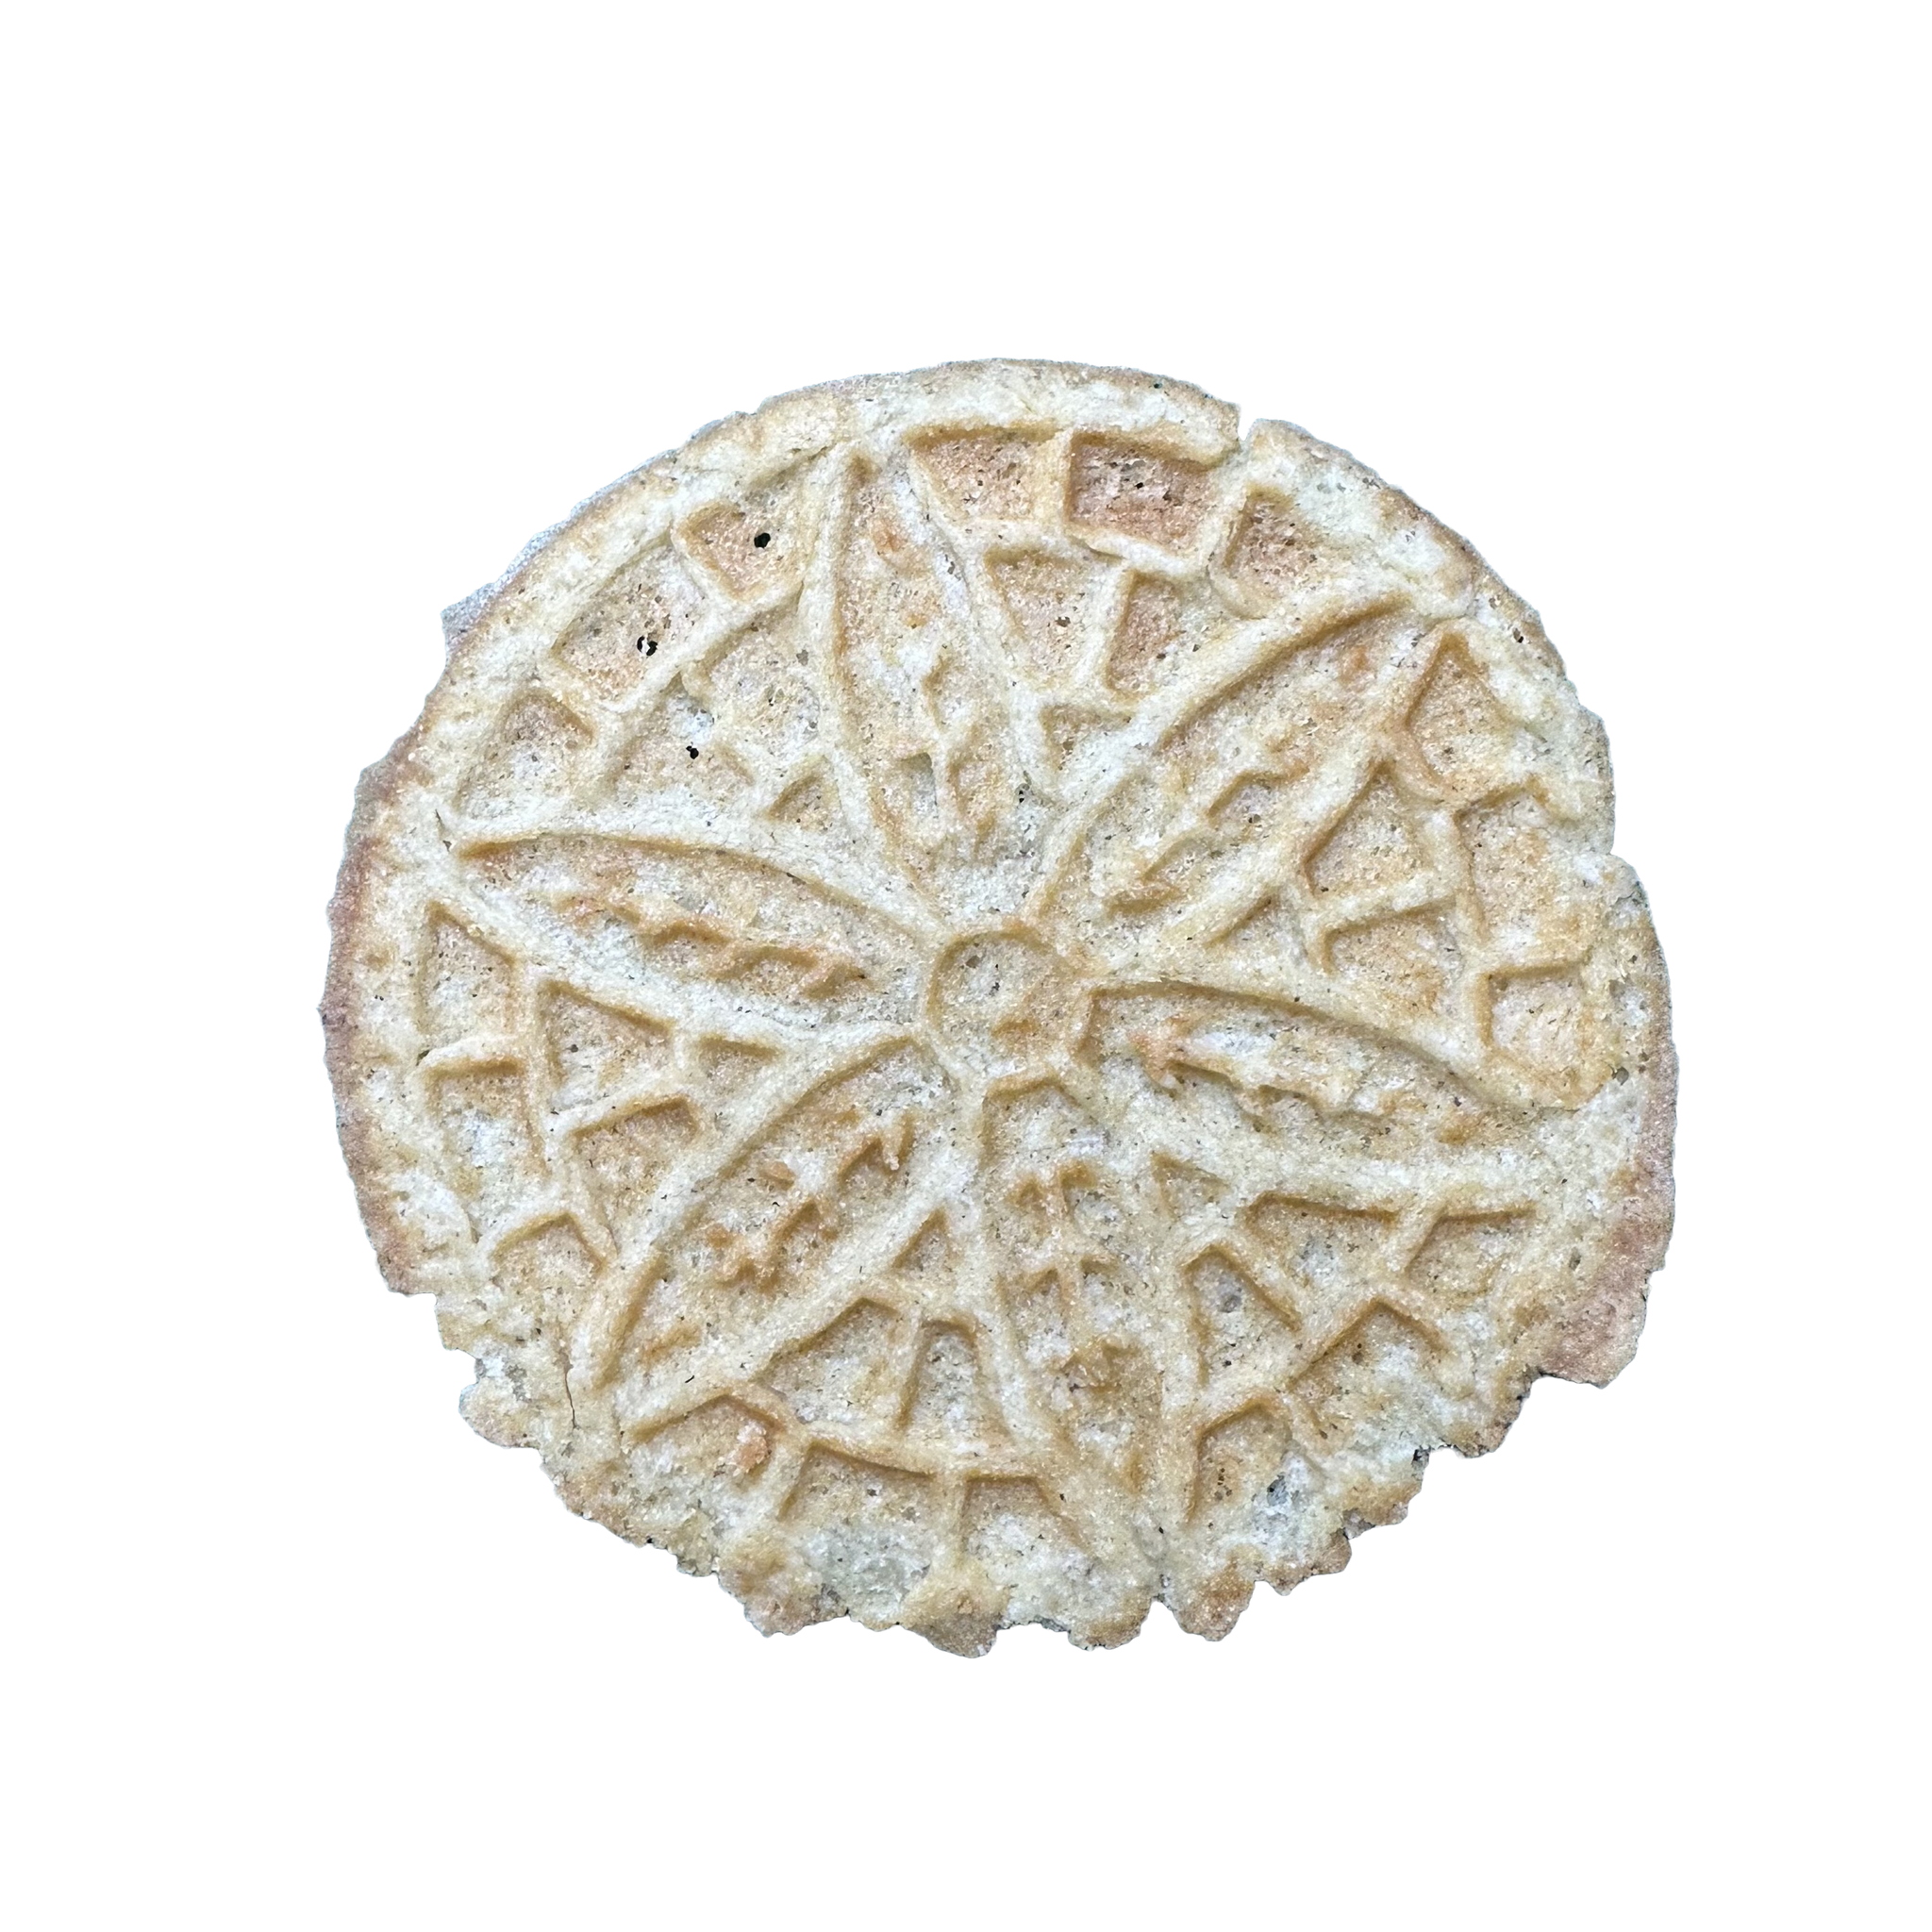 Anise Pizzelles